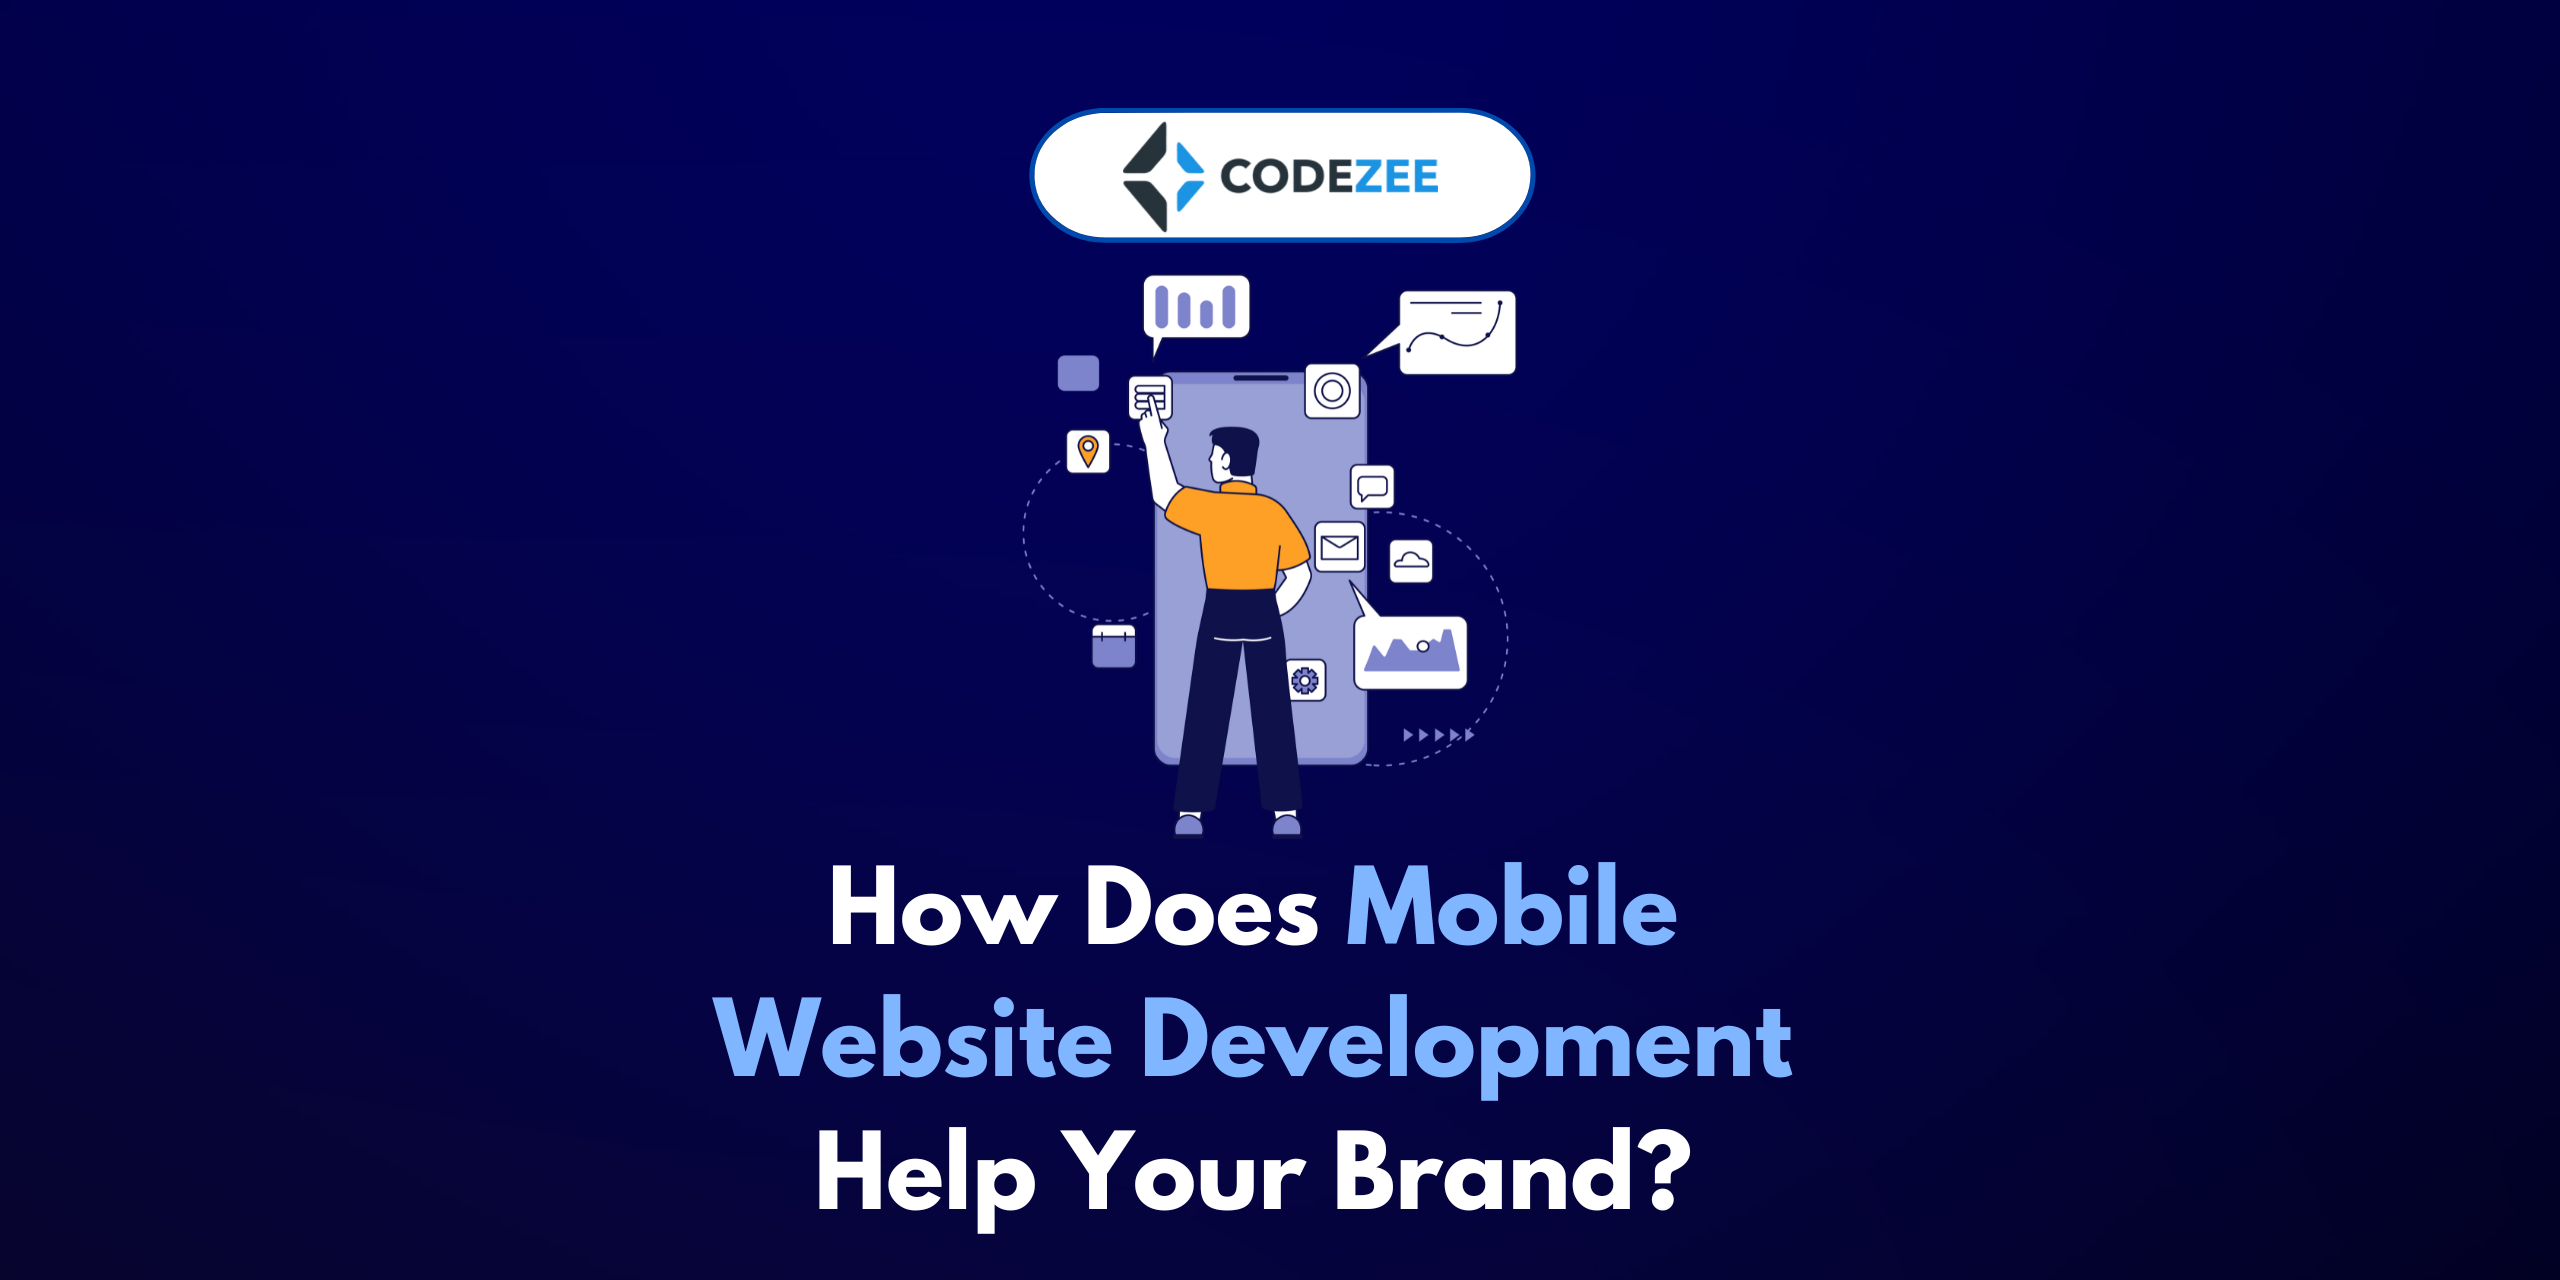 How Does Mobile Website Development Help Your Brand?